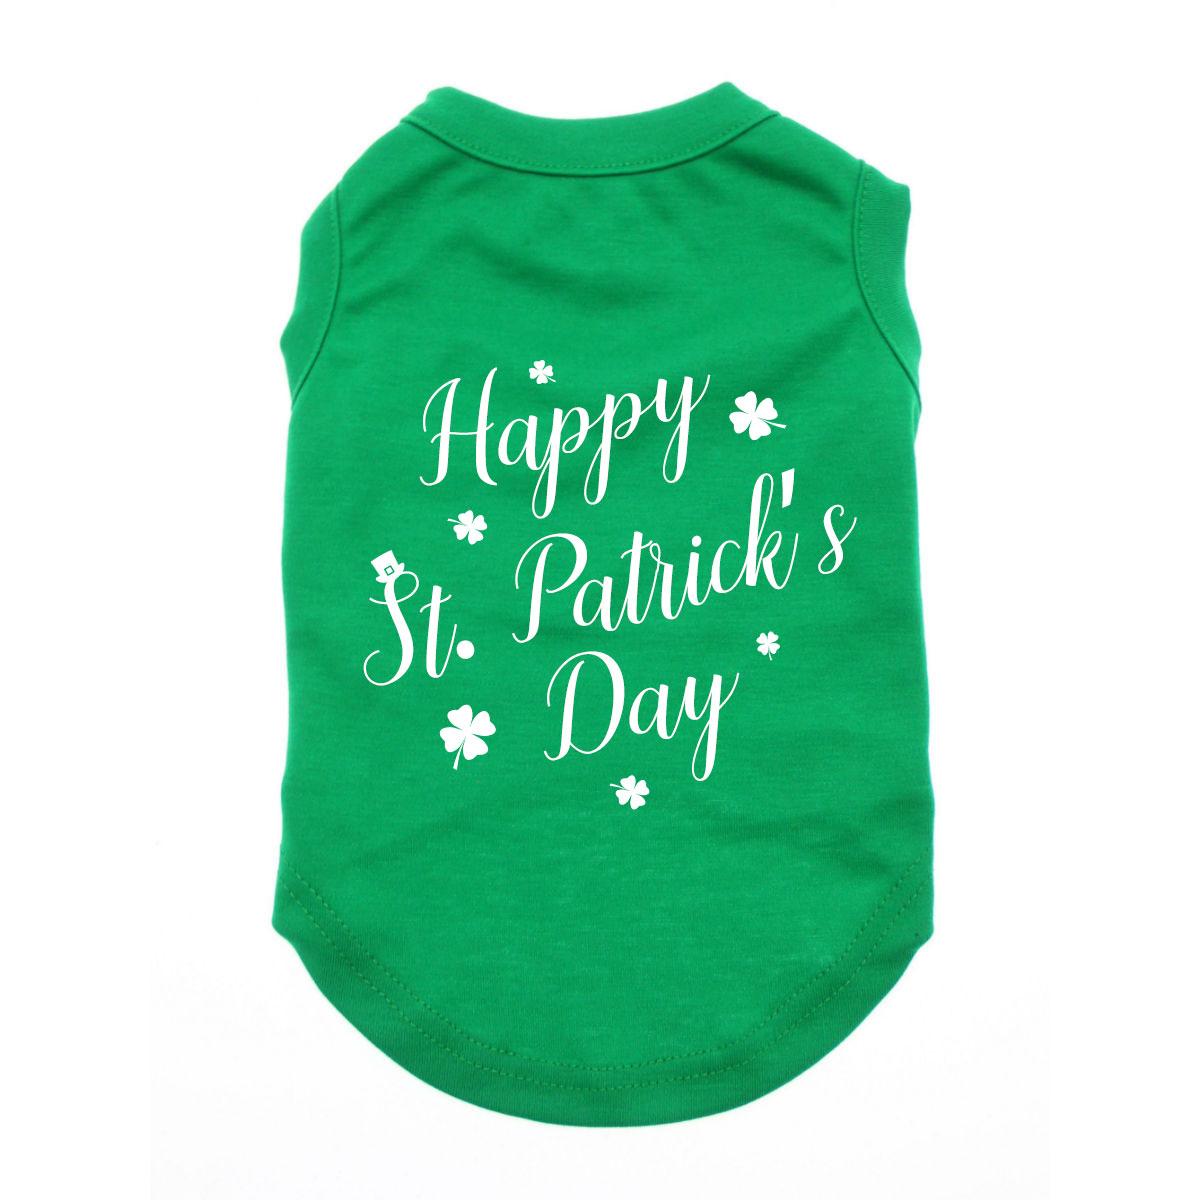 Happy St. Patrick's Day Dog Shirt - Green with Same Day Shipping ...